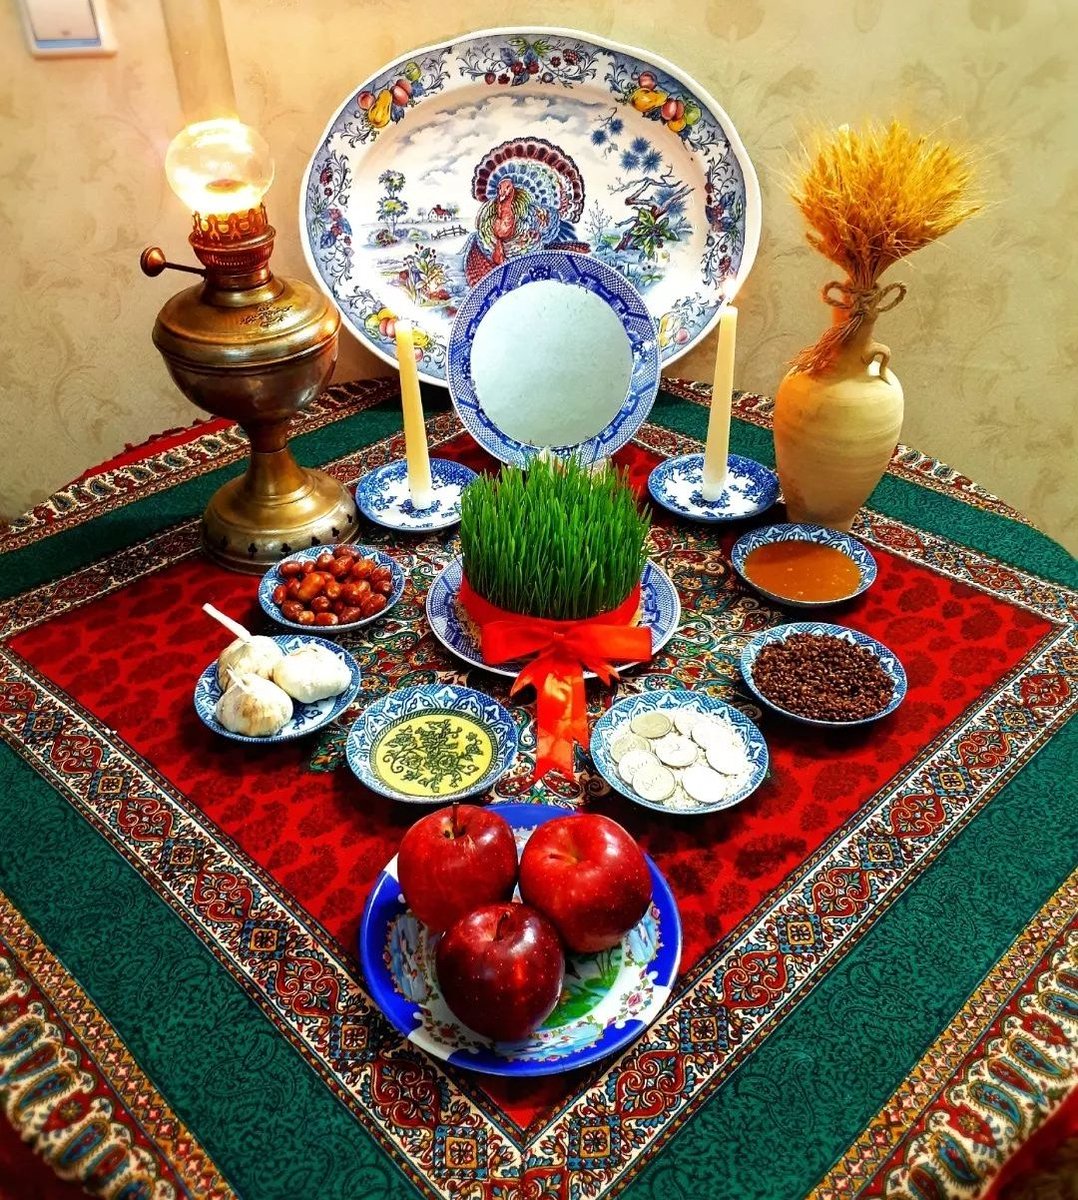 Happy Persian New Year ' Happy Nowruz ' Time is like a flowing river, no water passes beneath your feet twice, much like the river, moments never pass you by again, so cherish every moment that life gives you and have a wonderful New Year.